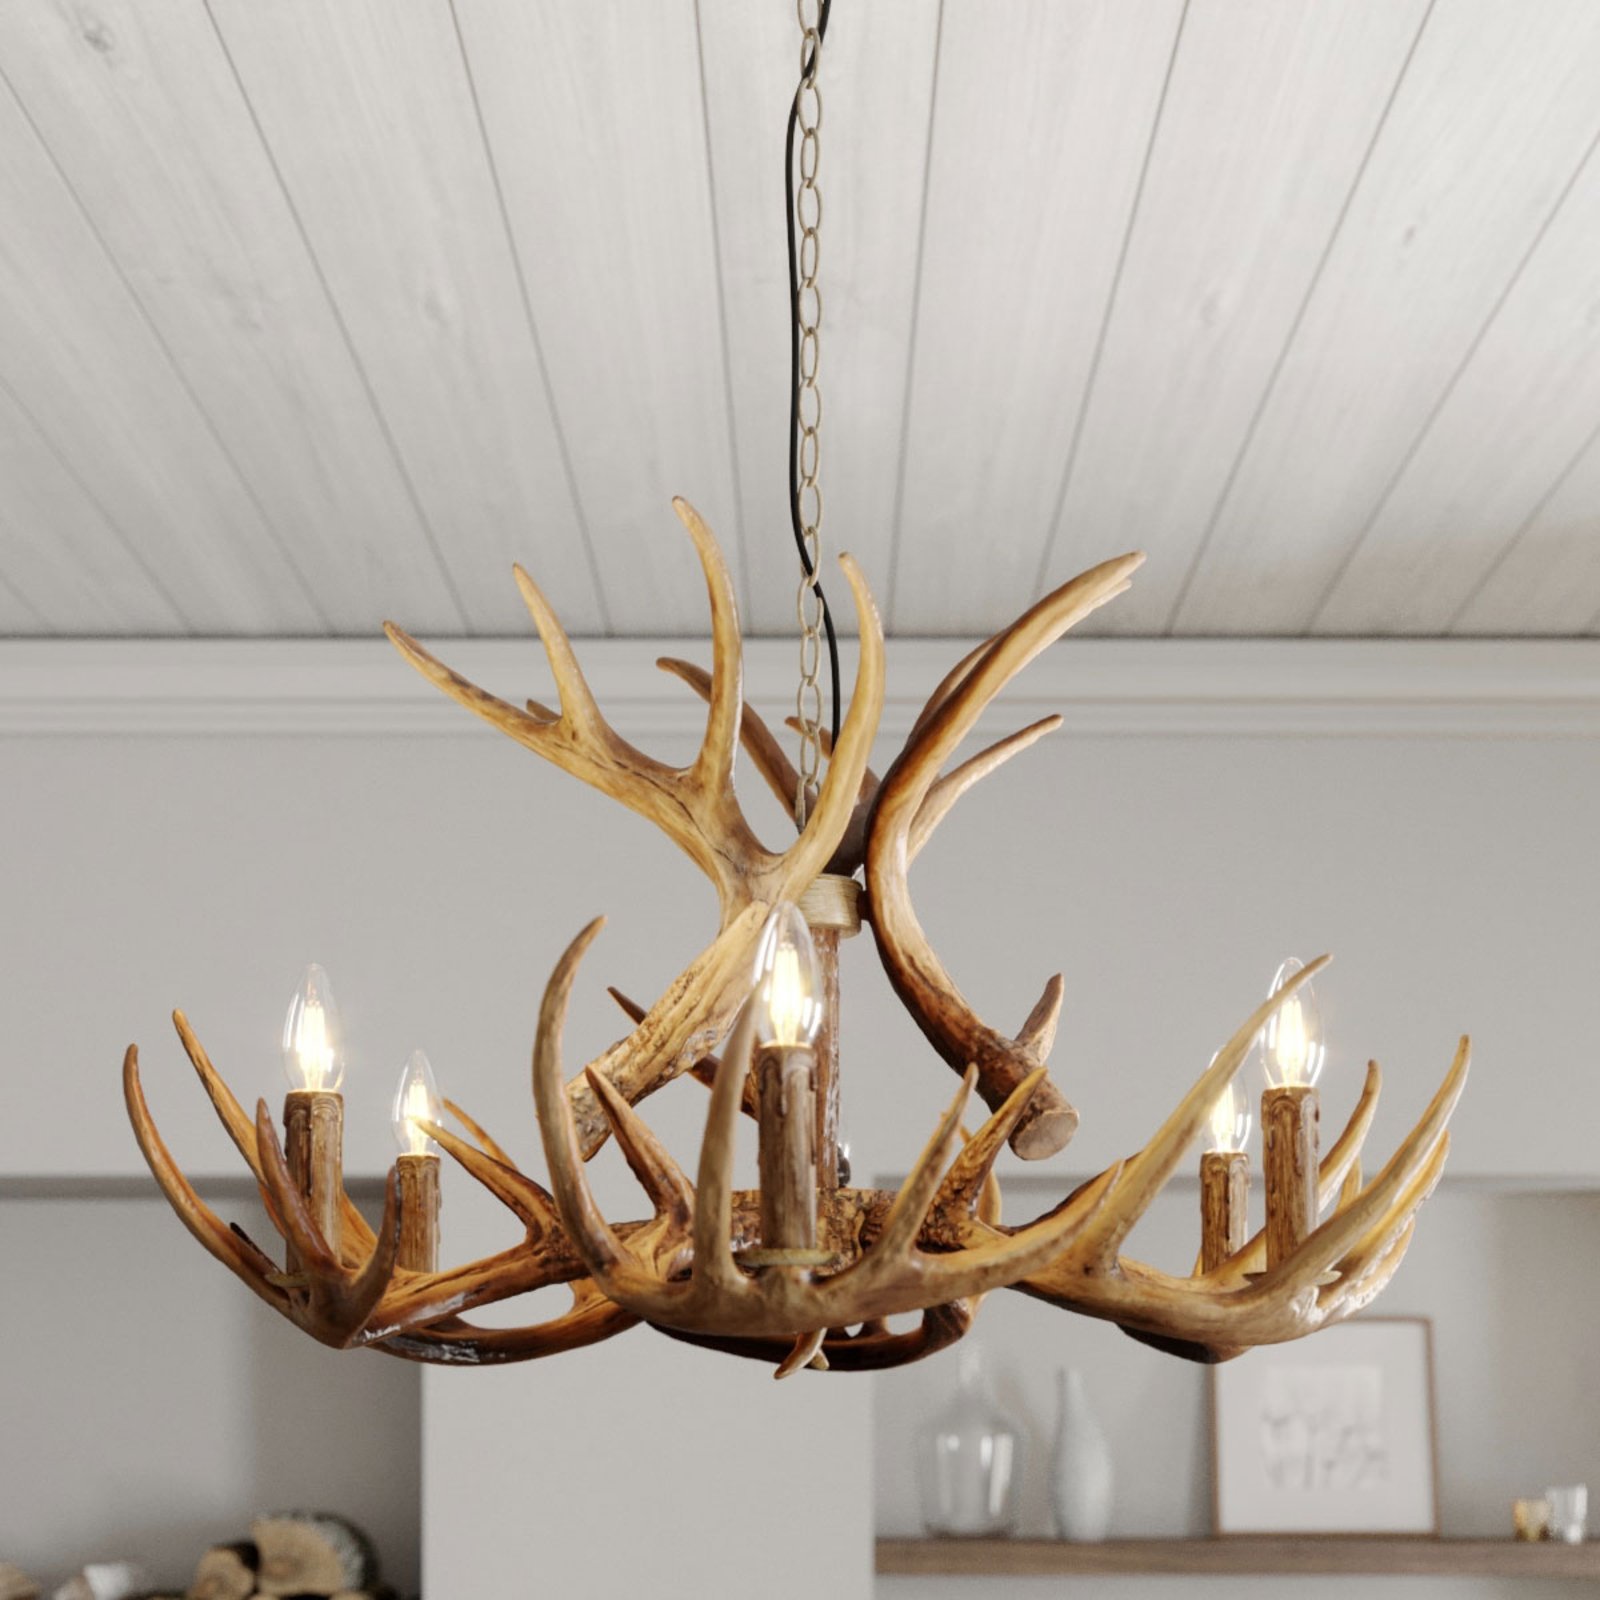 Lindby Fibi Hanging Light Antlers, Pottery Barn Small Antler Chandelier